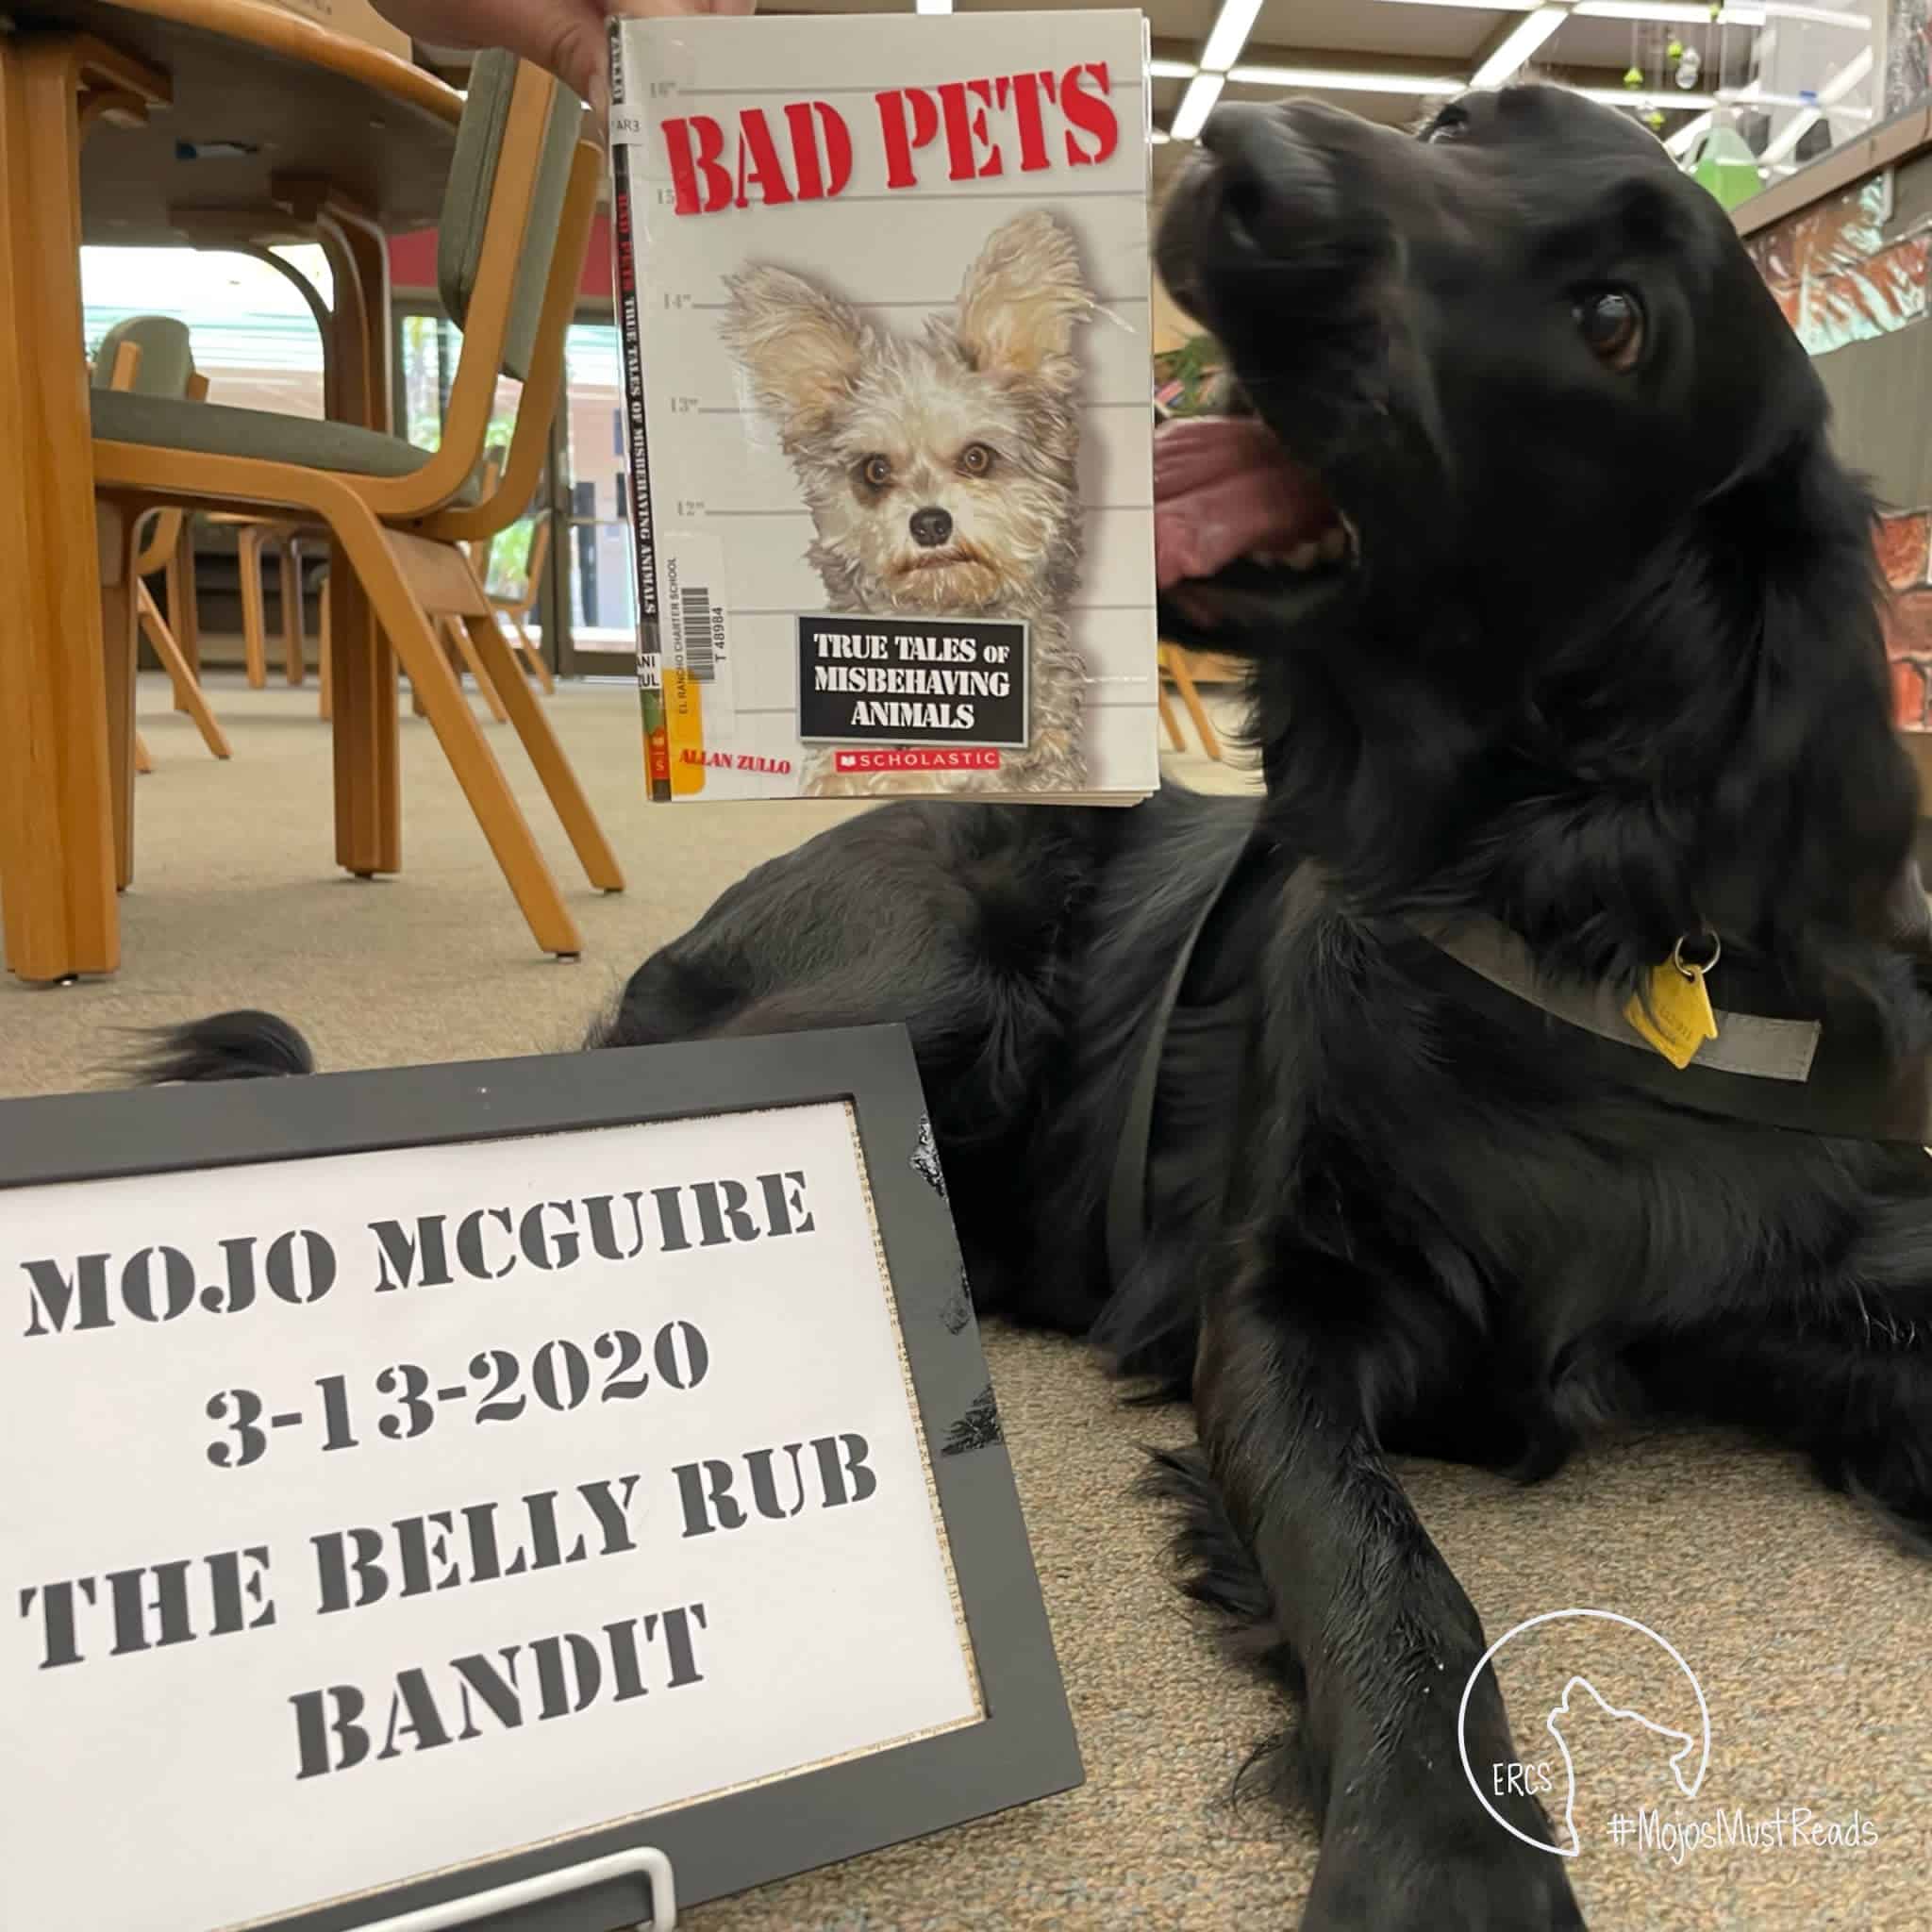 A flat-coated retriever poses with a sign reading "Mojo McGuire the Belly Rub Bandit"